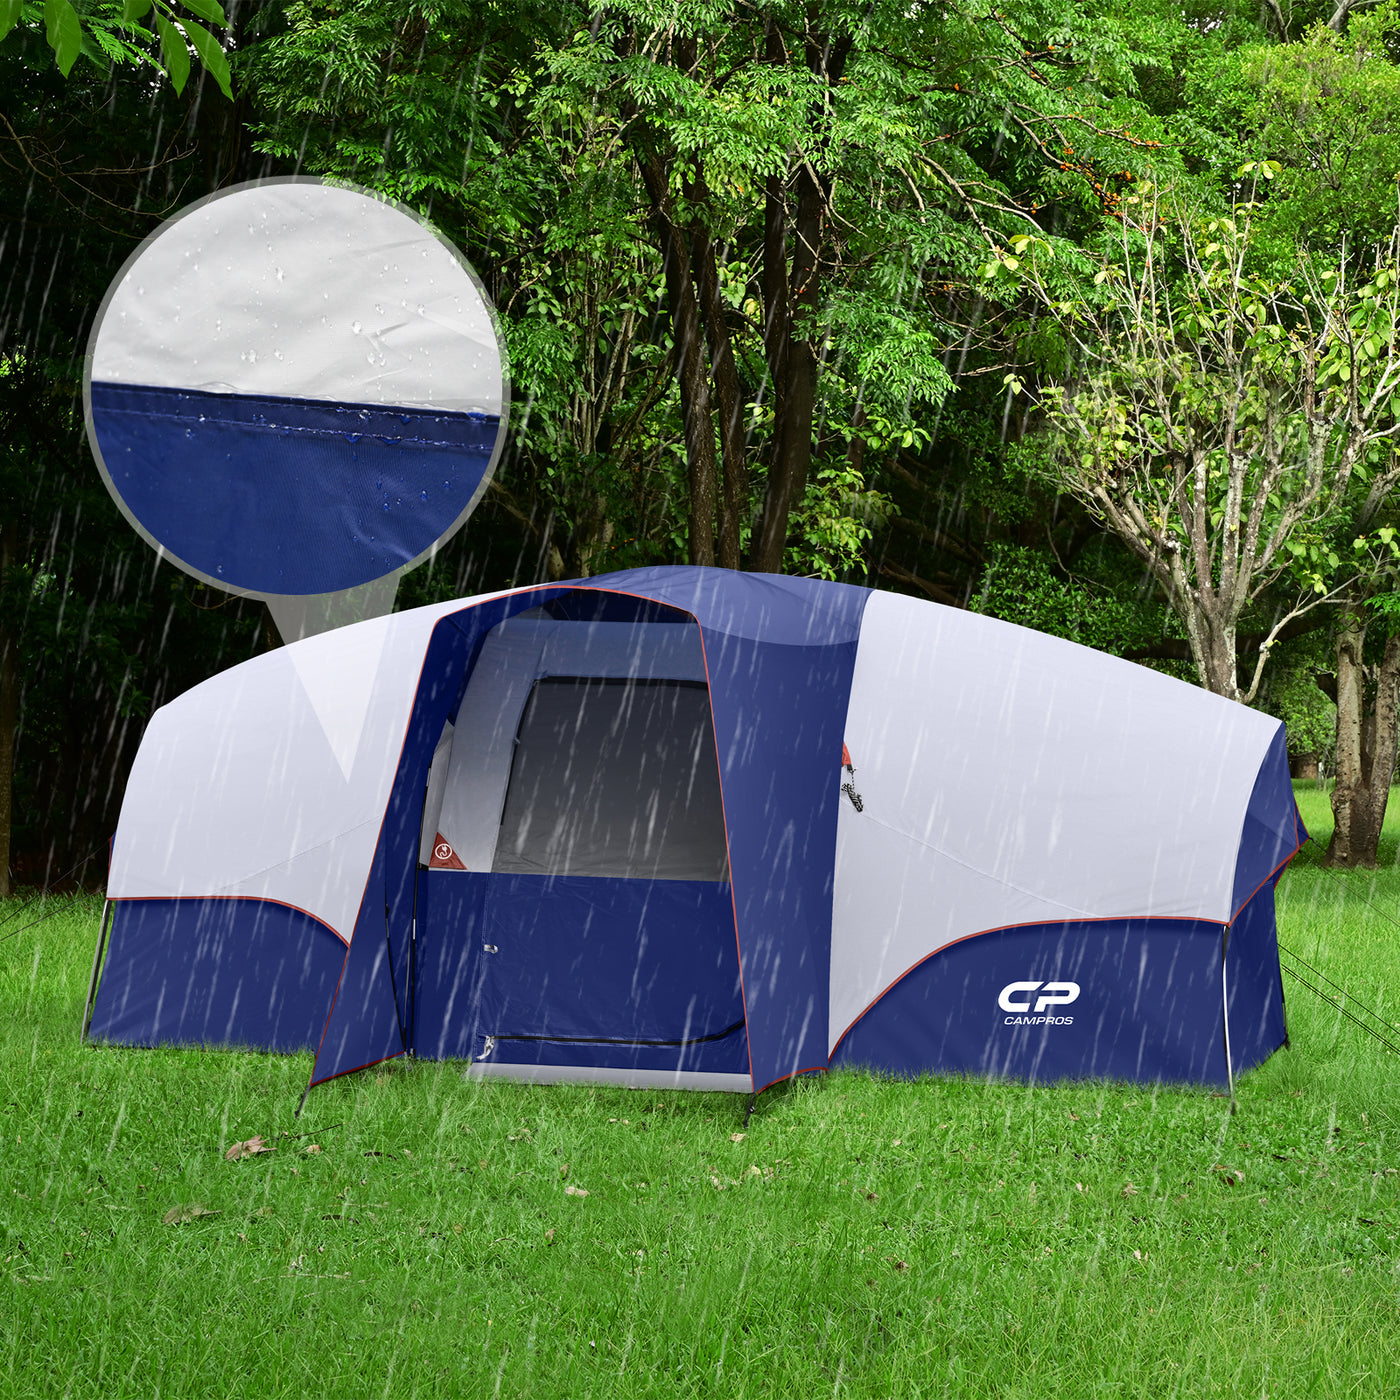 Camphours Family Camping 8 Person Tent (New)